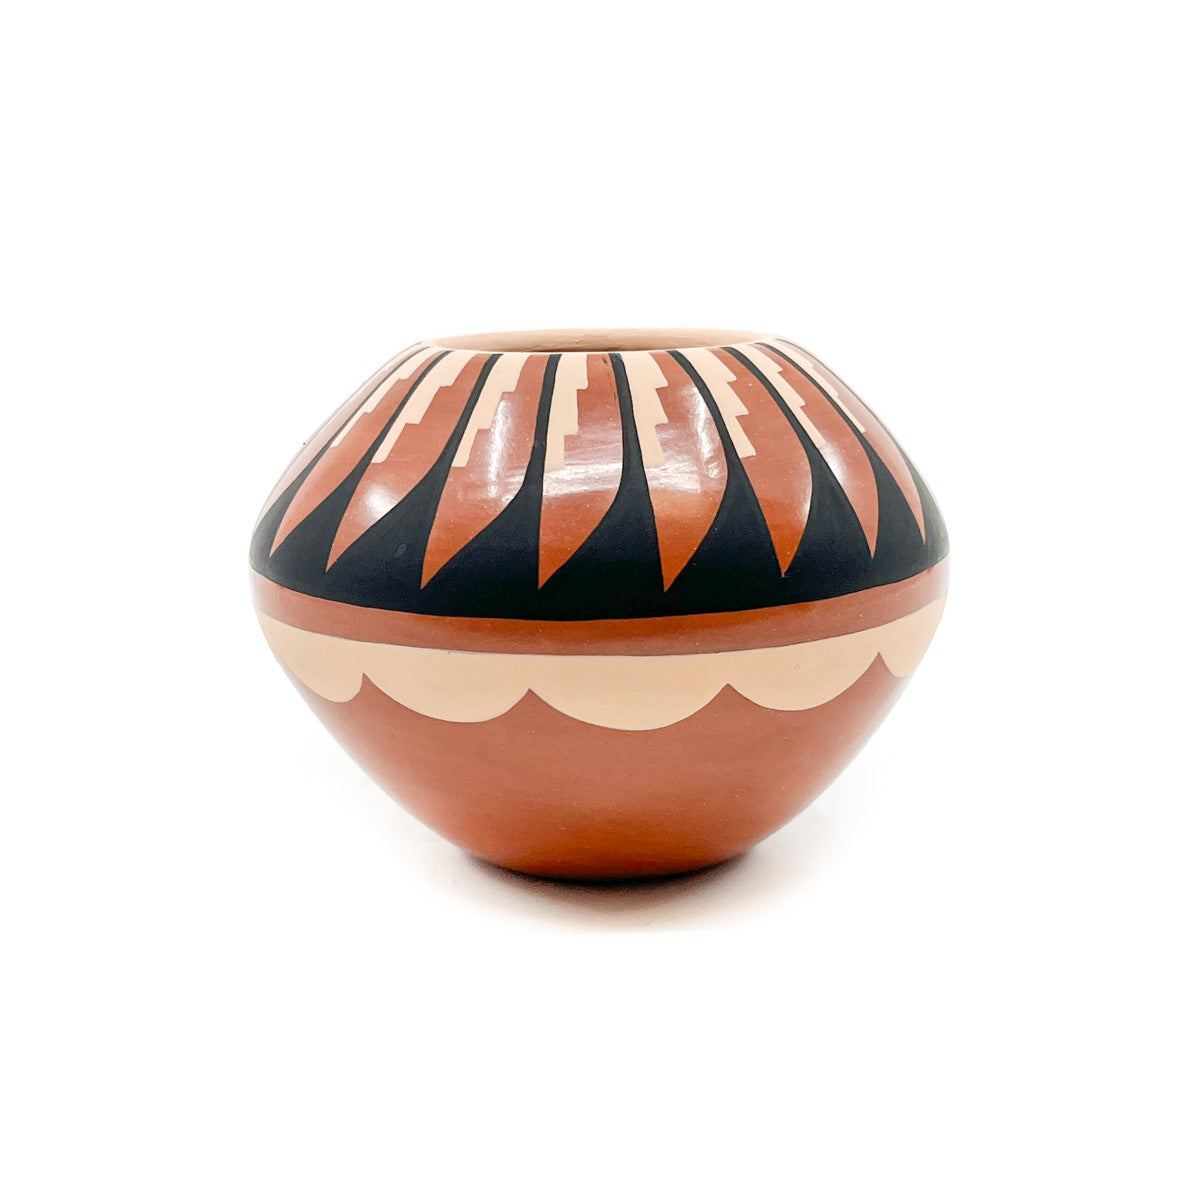 Polychrome Seed Pot by C. G. Loretto